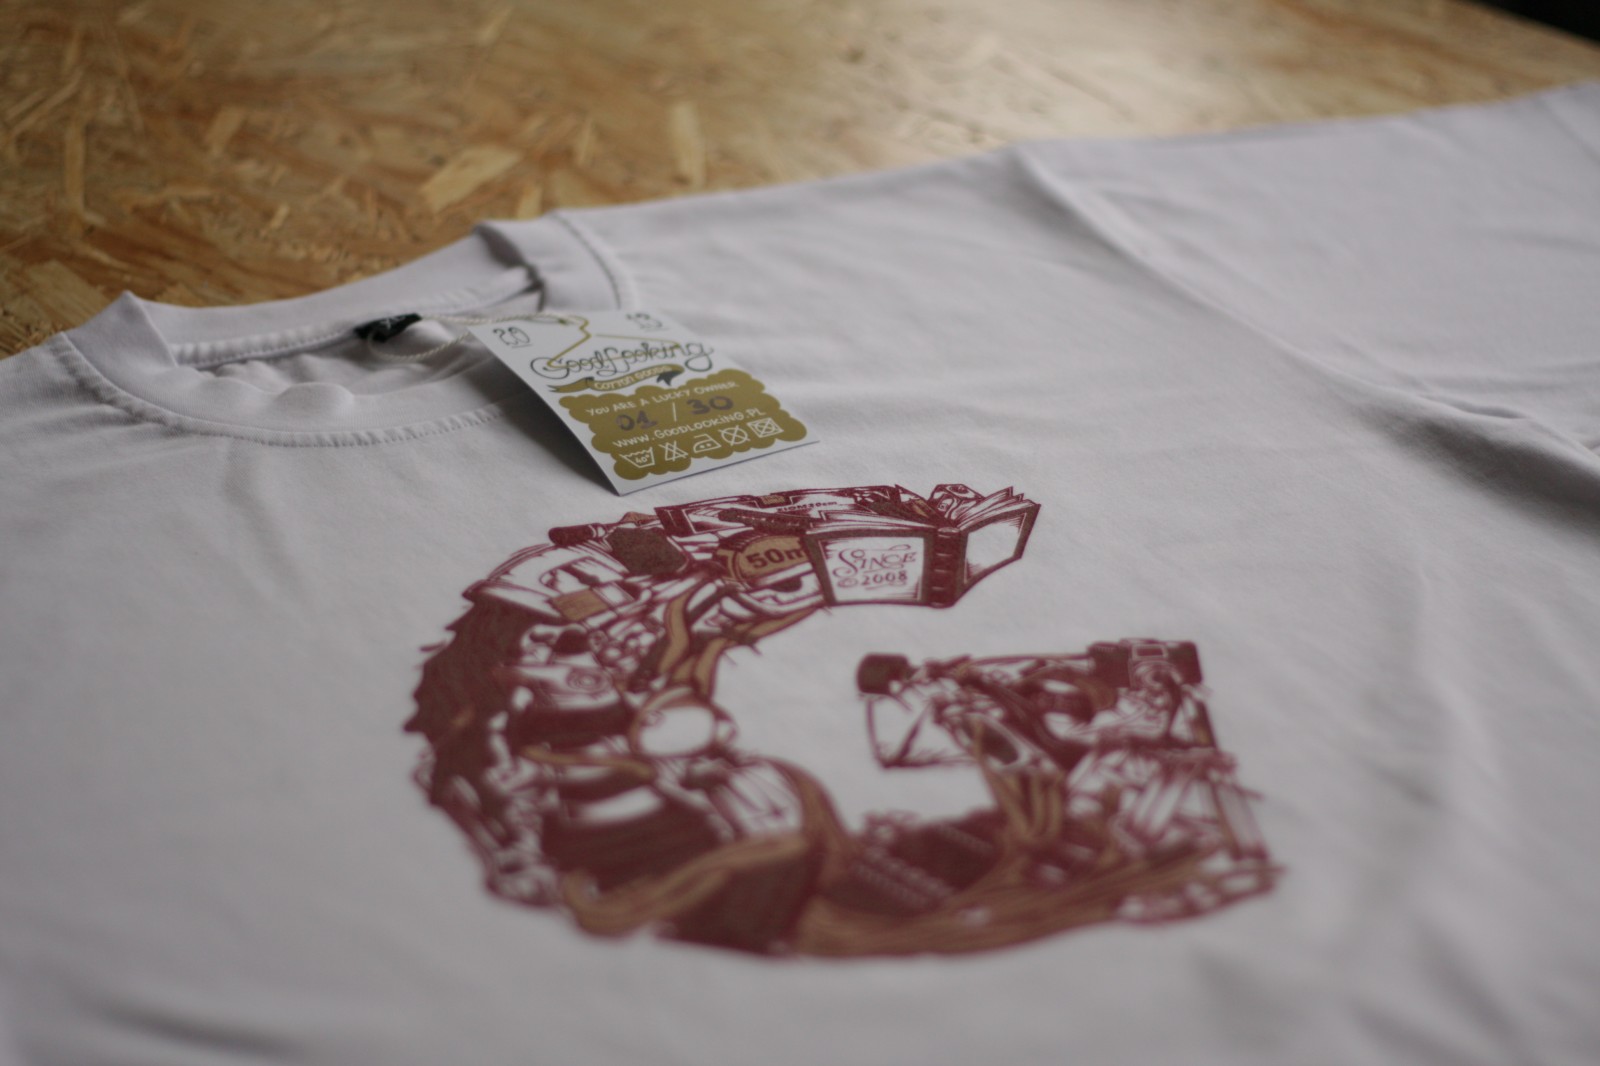 Warsaw Printed T-shirts with GLS company logo | Limited collection of GLS T-shirts | Backstage